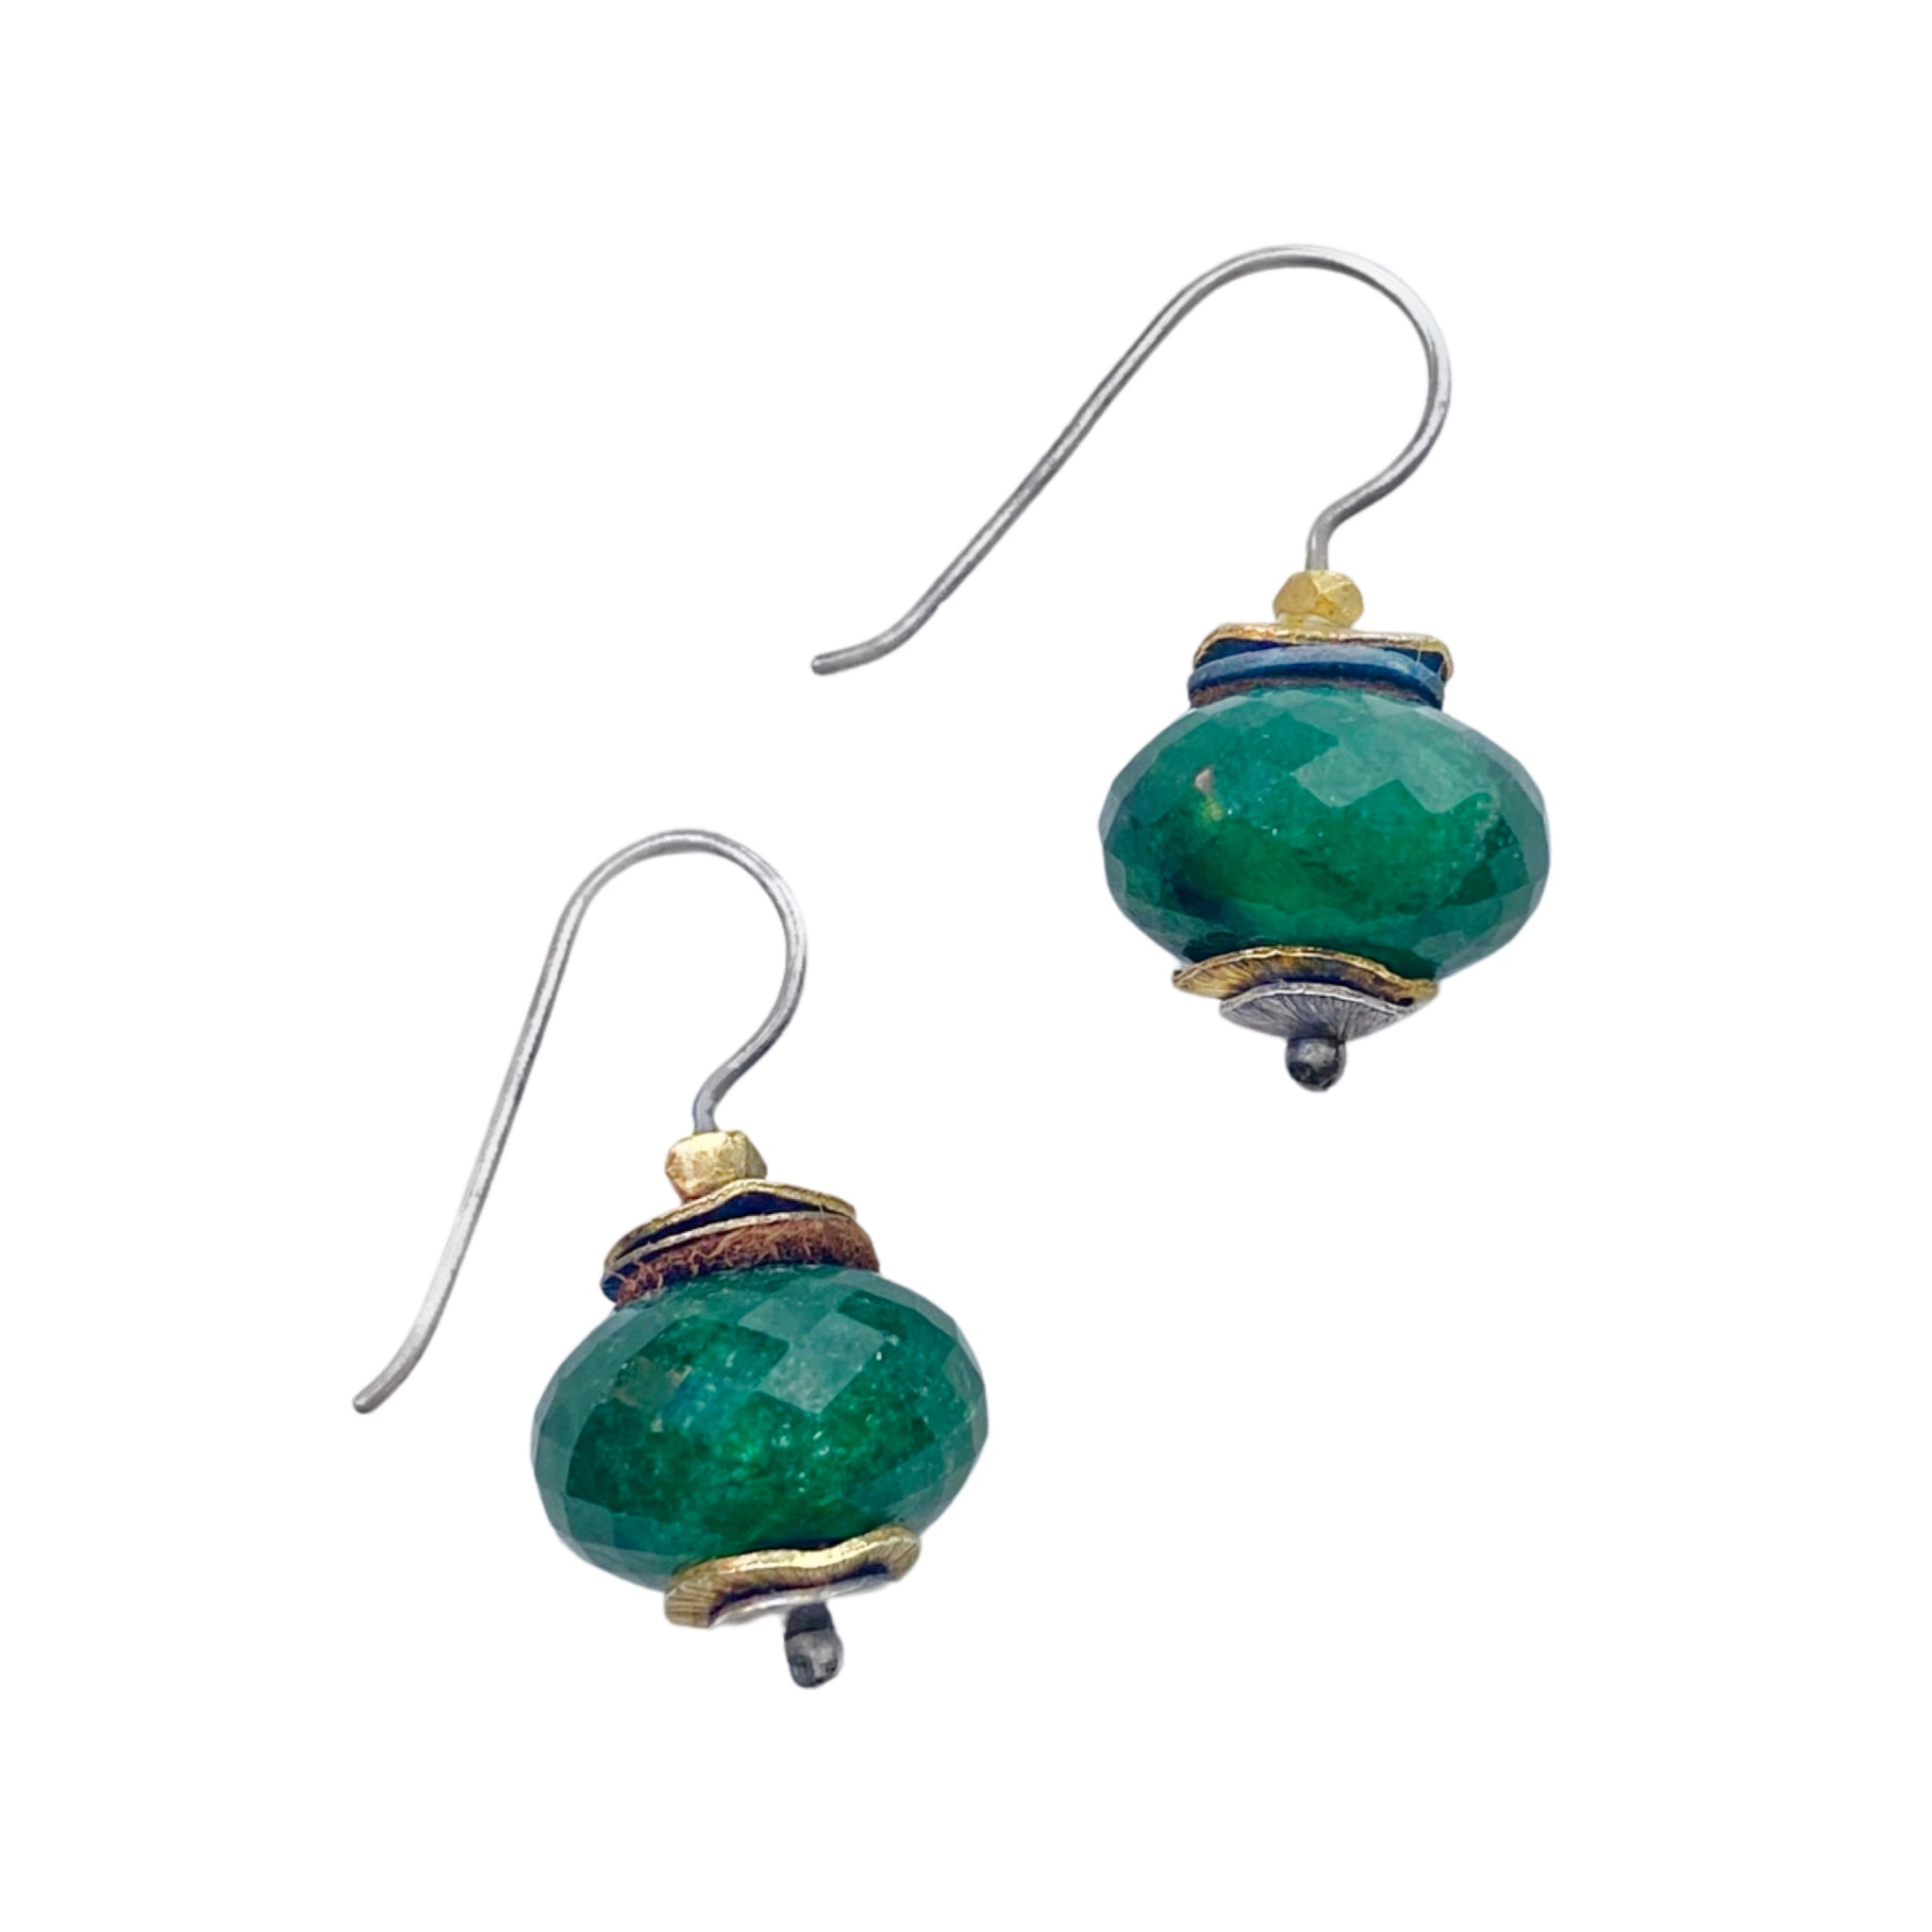 Lulu Designs Faceted green sunstone rondel drop earrings available at Shaylula Jewlery & Gifts in Tarrytown, NY